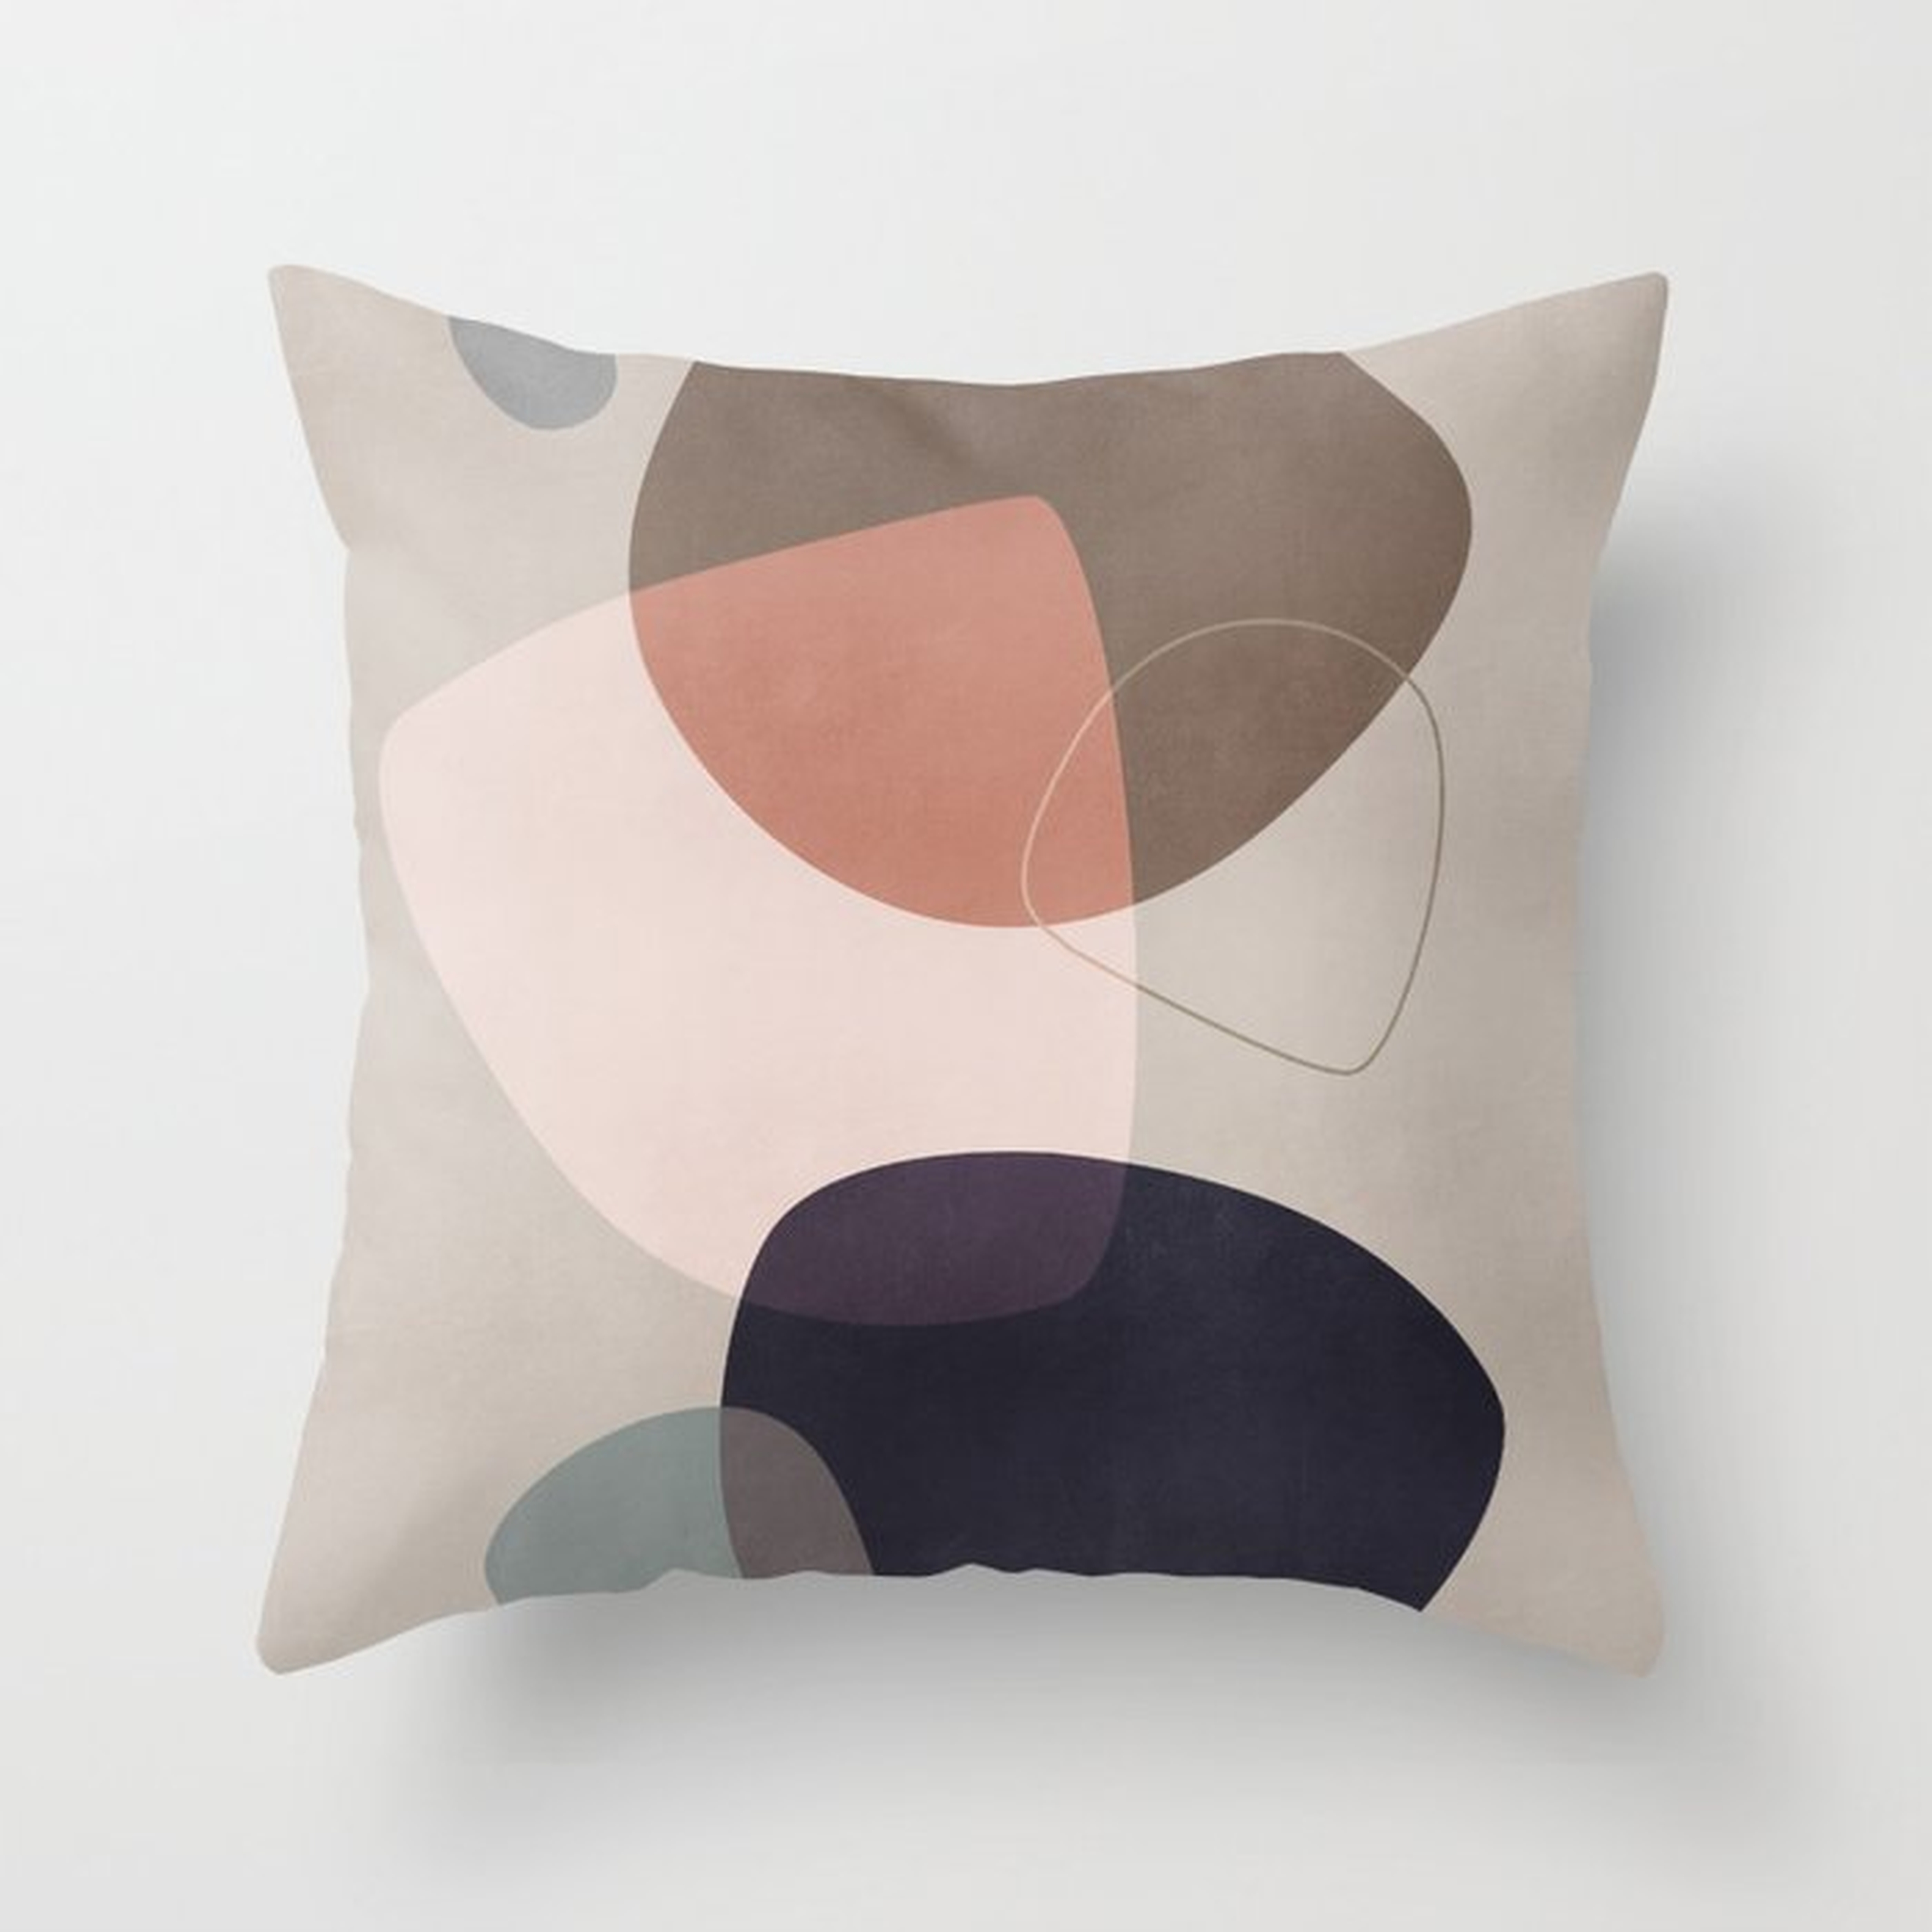 Graphic 209y Couch Throw Pillow by Mareike BaPhmer - Cover (18" x 18") with pillow insert - Outdoor Pillow - Society6